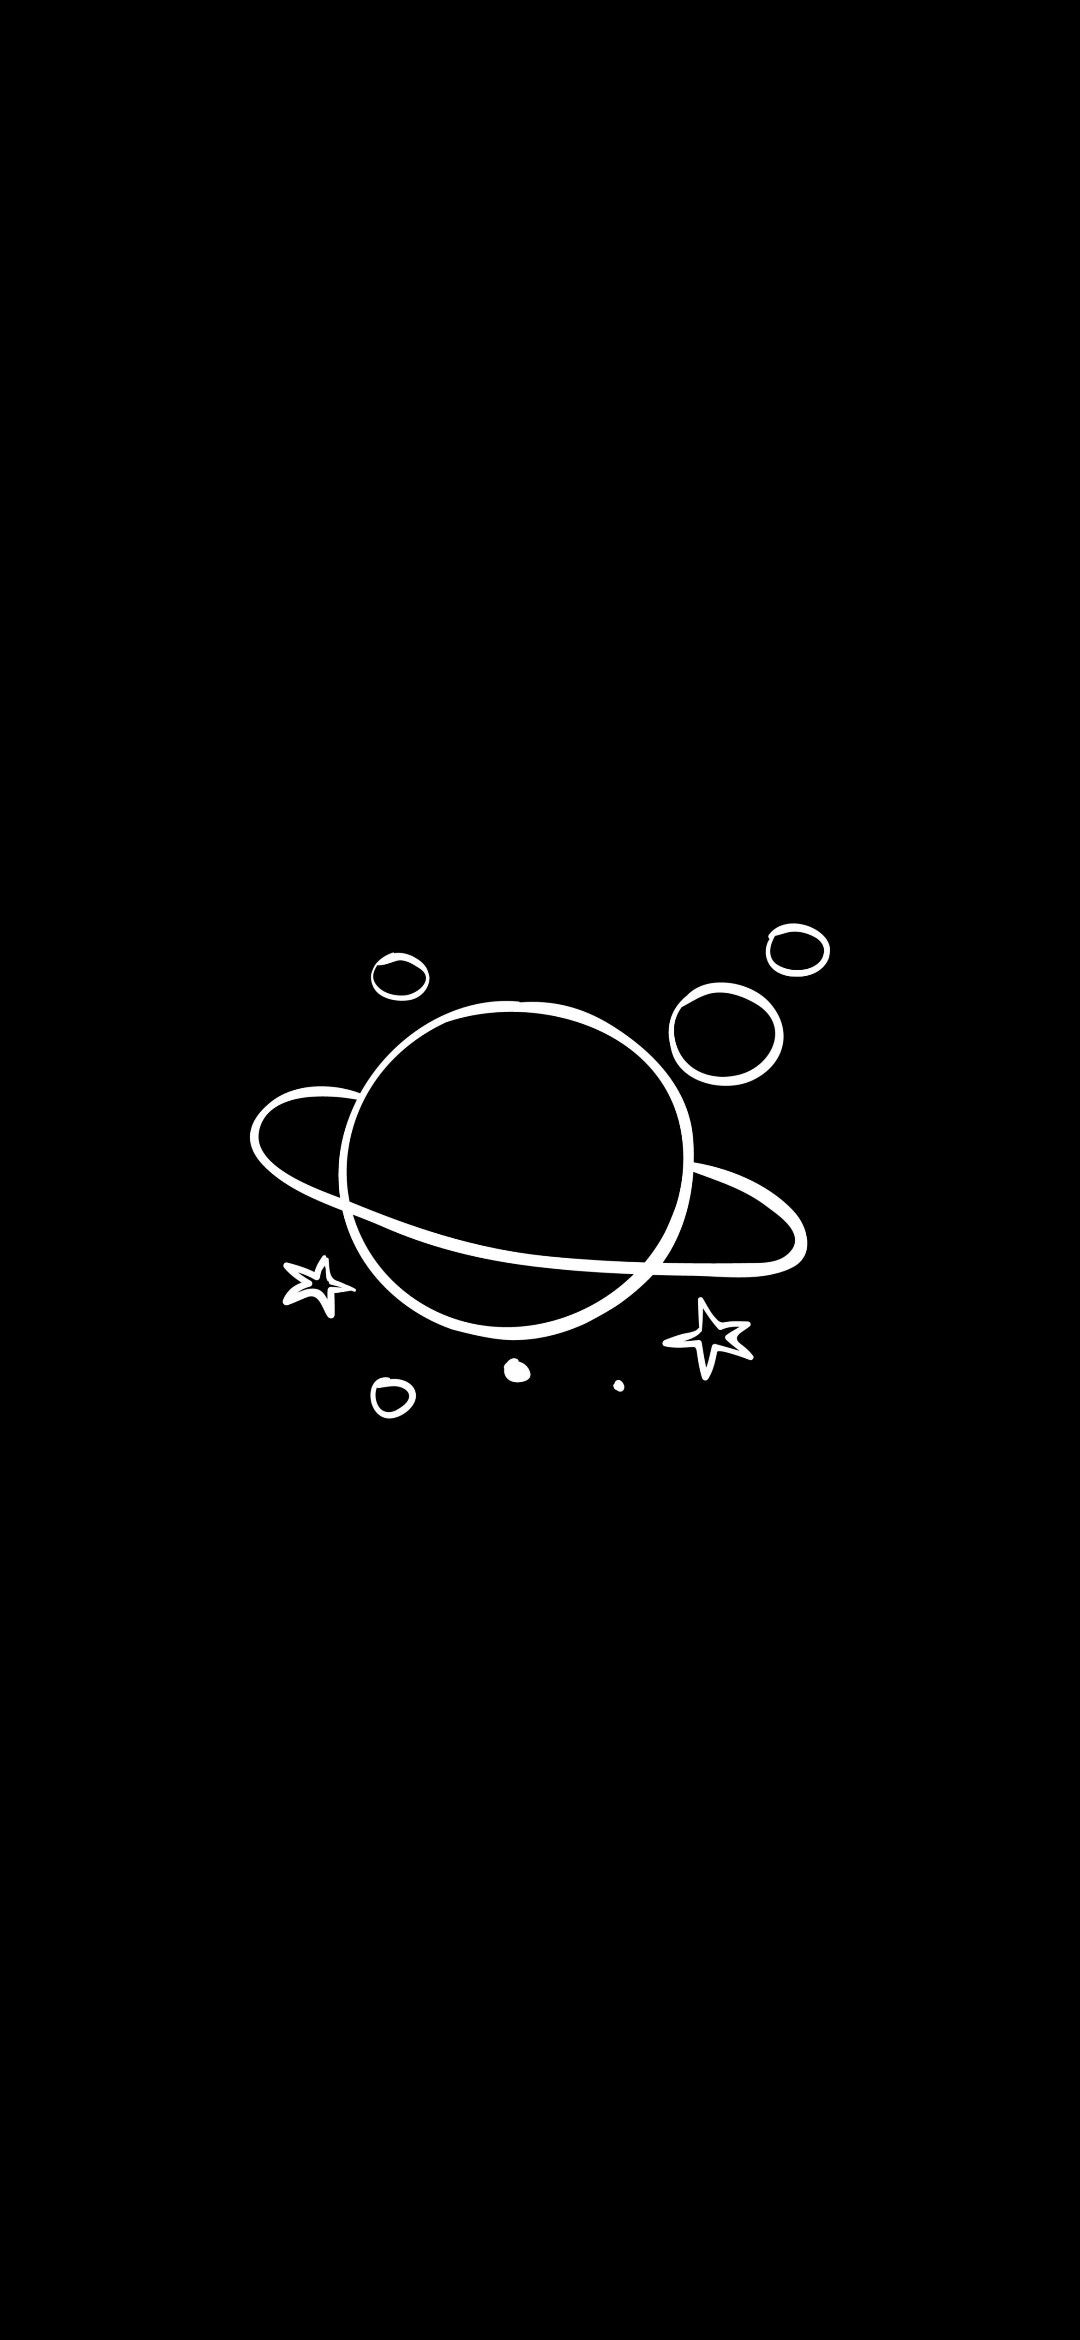 Aesthetic wallpaper for phone black and white. - Planet